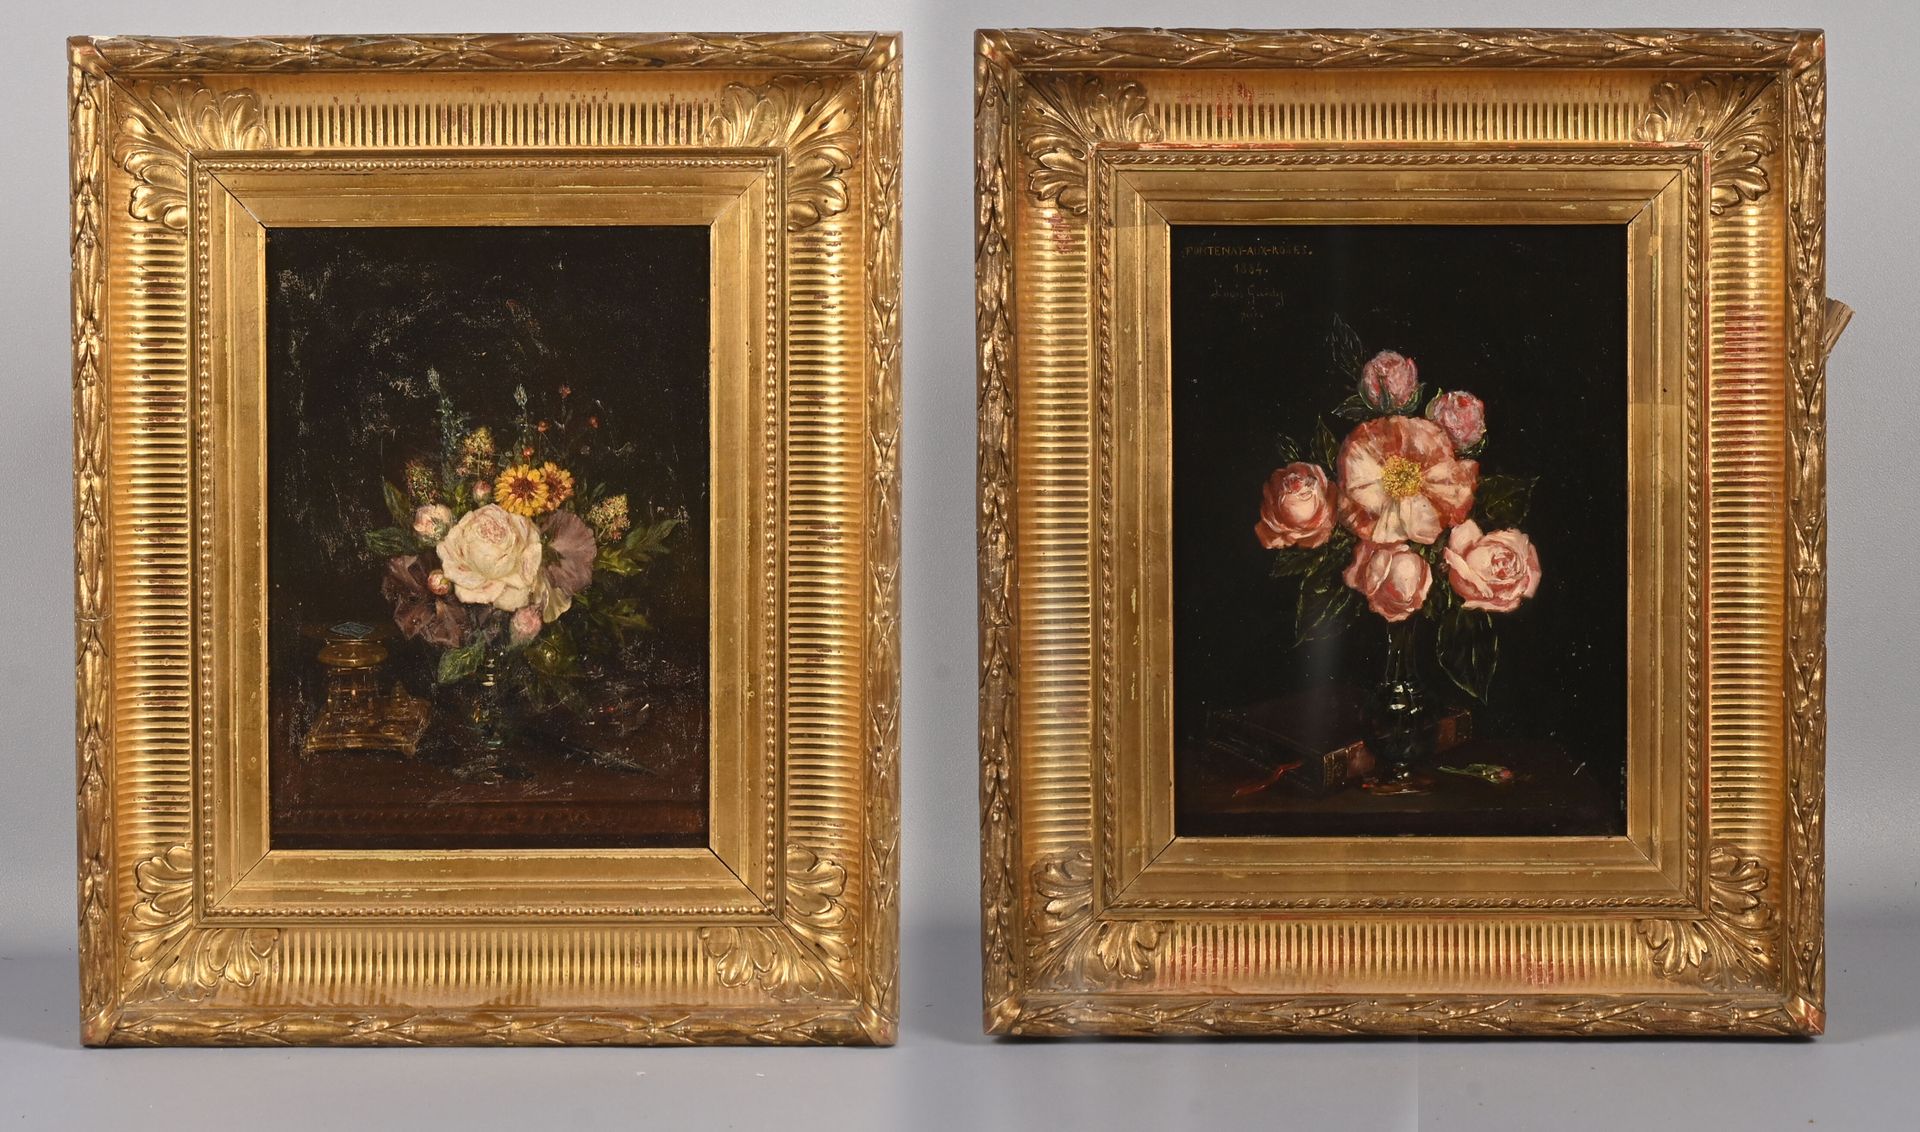 Null Louis GUEDY
(Grenoble 1847 - Paris 1926)
Pair of bouquets of flowers
Pair o&hellip;